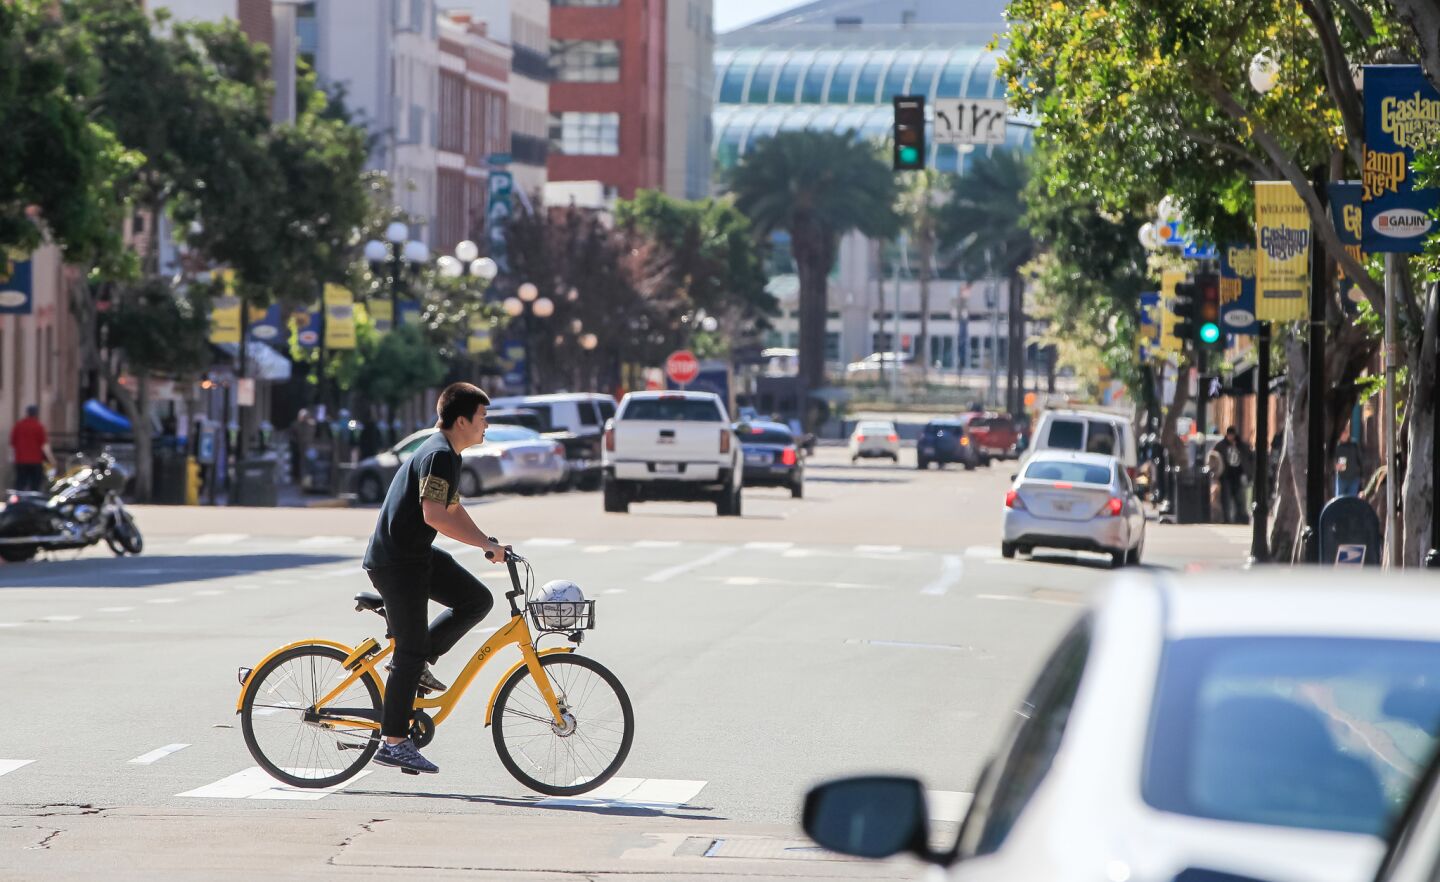 A person crosses 4th Avenue at G Street on an Ofo bike.